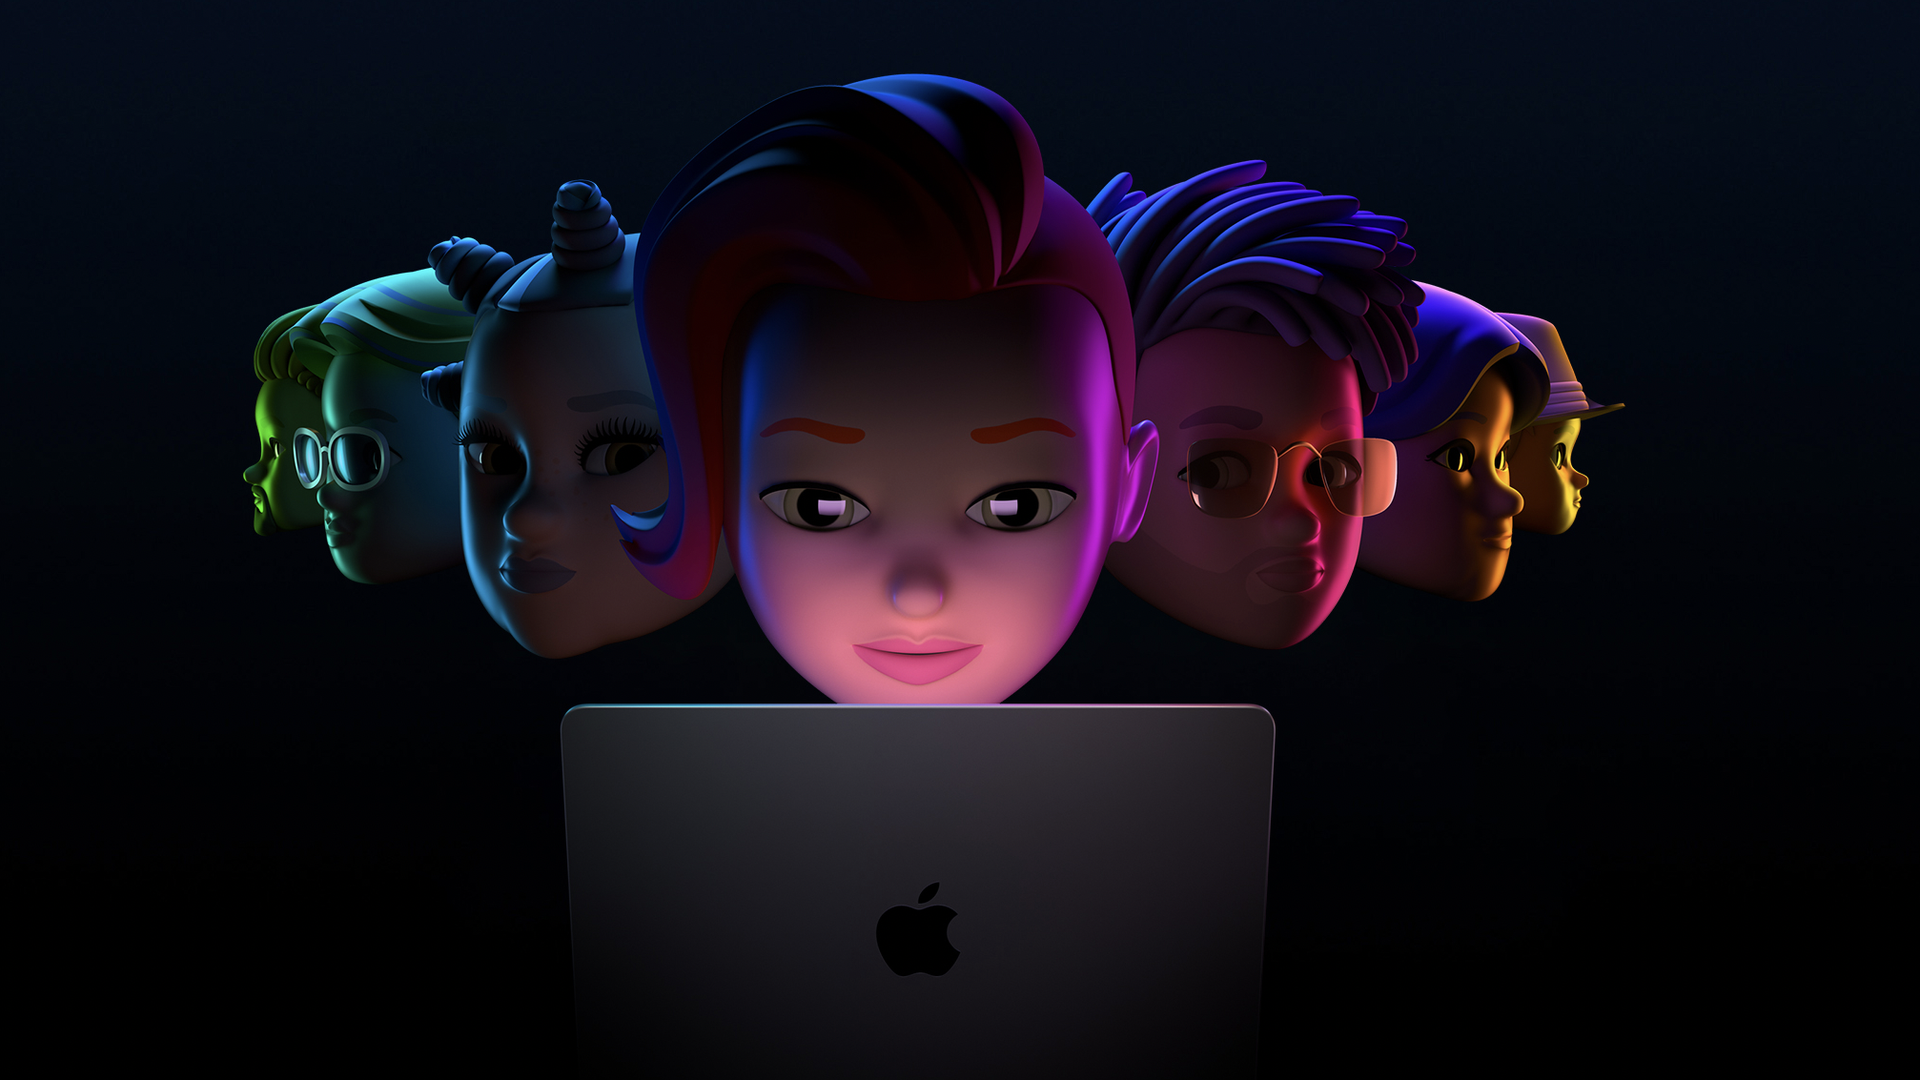 Apple's preview page for WWDC, featuring several faces staring at a Mac laptop